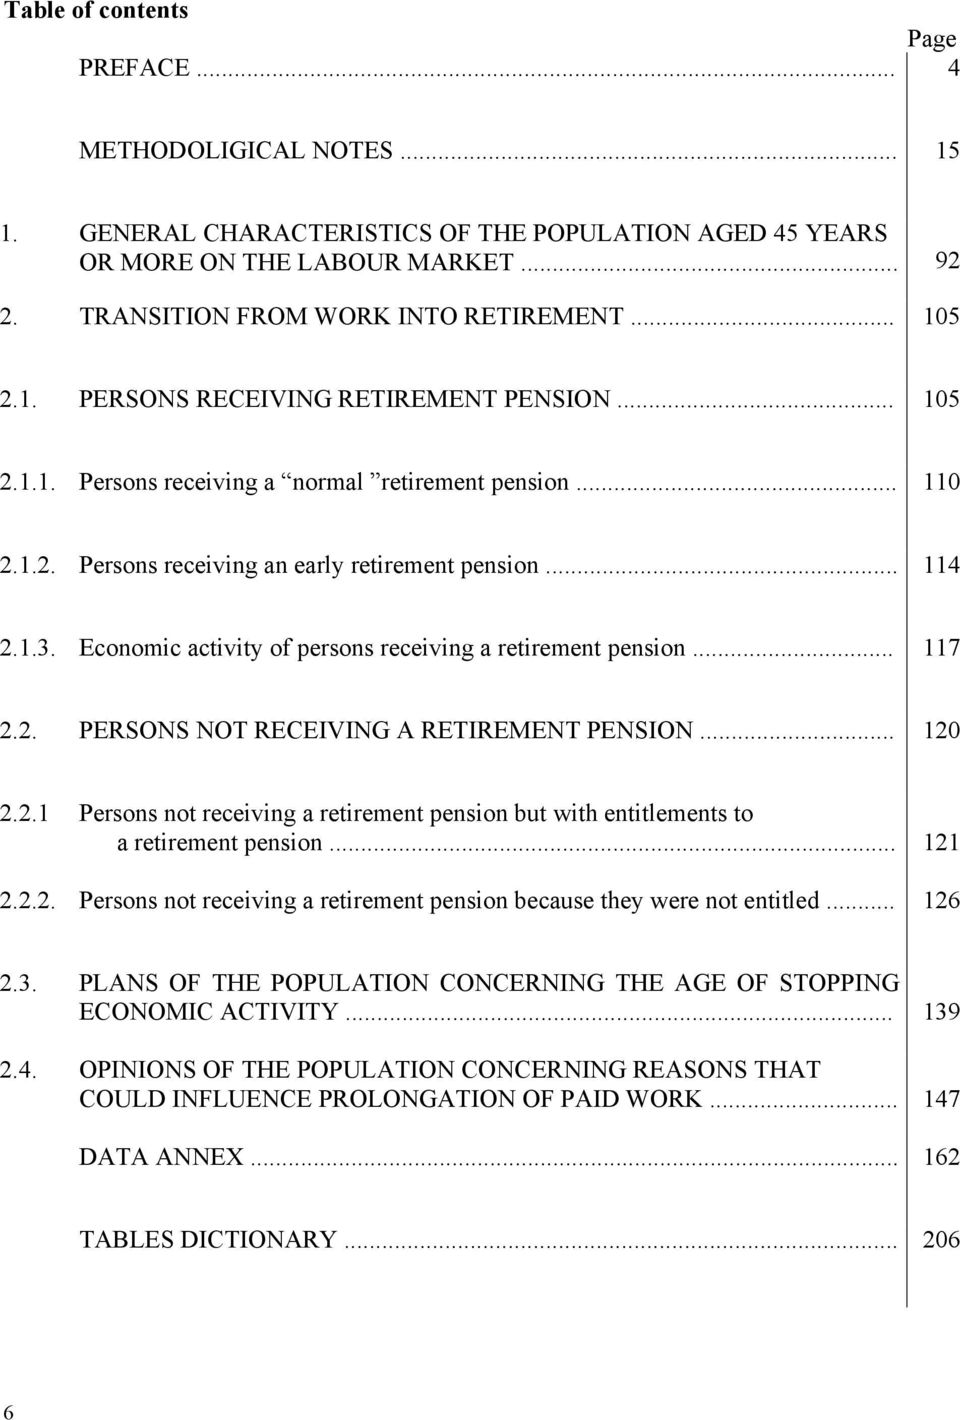 Economic activity of persons receiving a retirement pension... 117 2.2. PERSONS NOT RECEIVING A RETIREMENT PENSION... 120 2.2.1 Persons not receiving a retirement pension but with entitlements to a retirement pension.